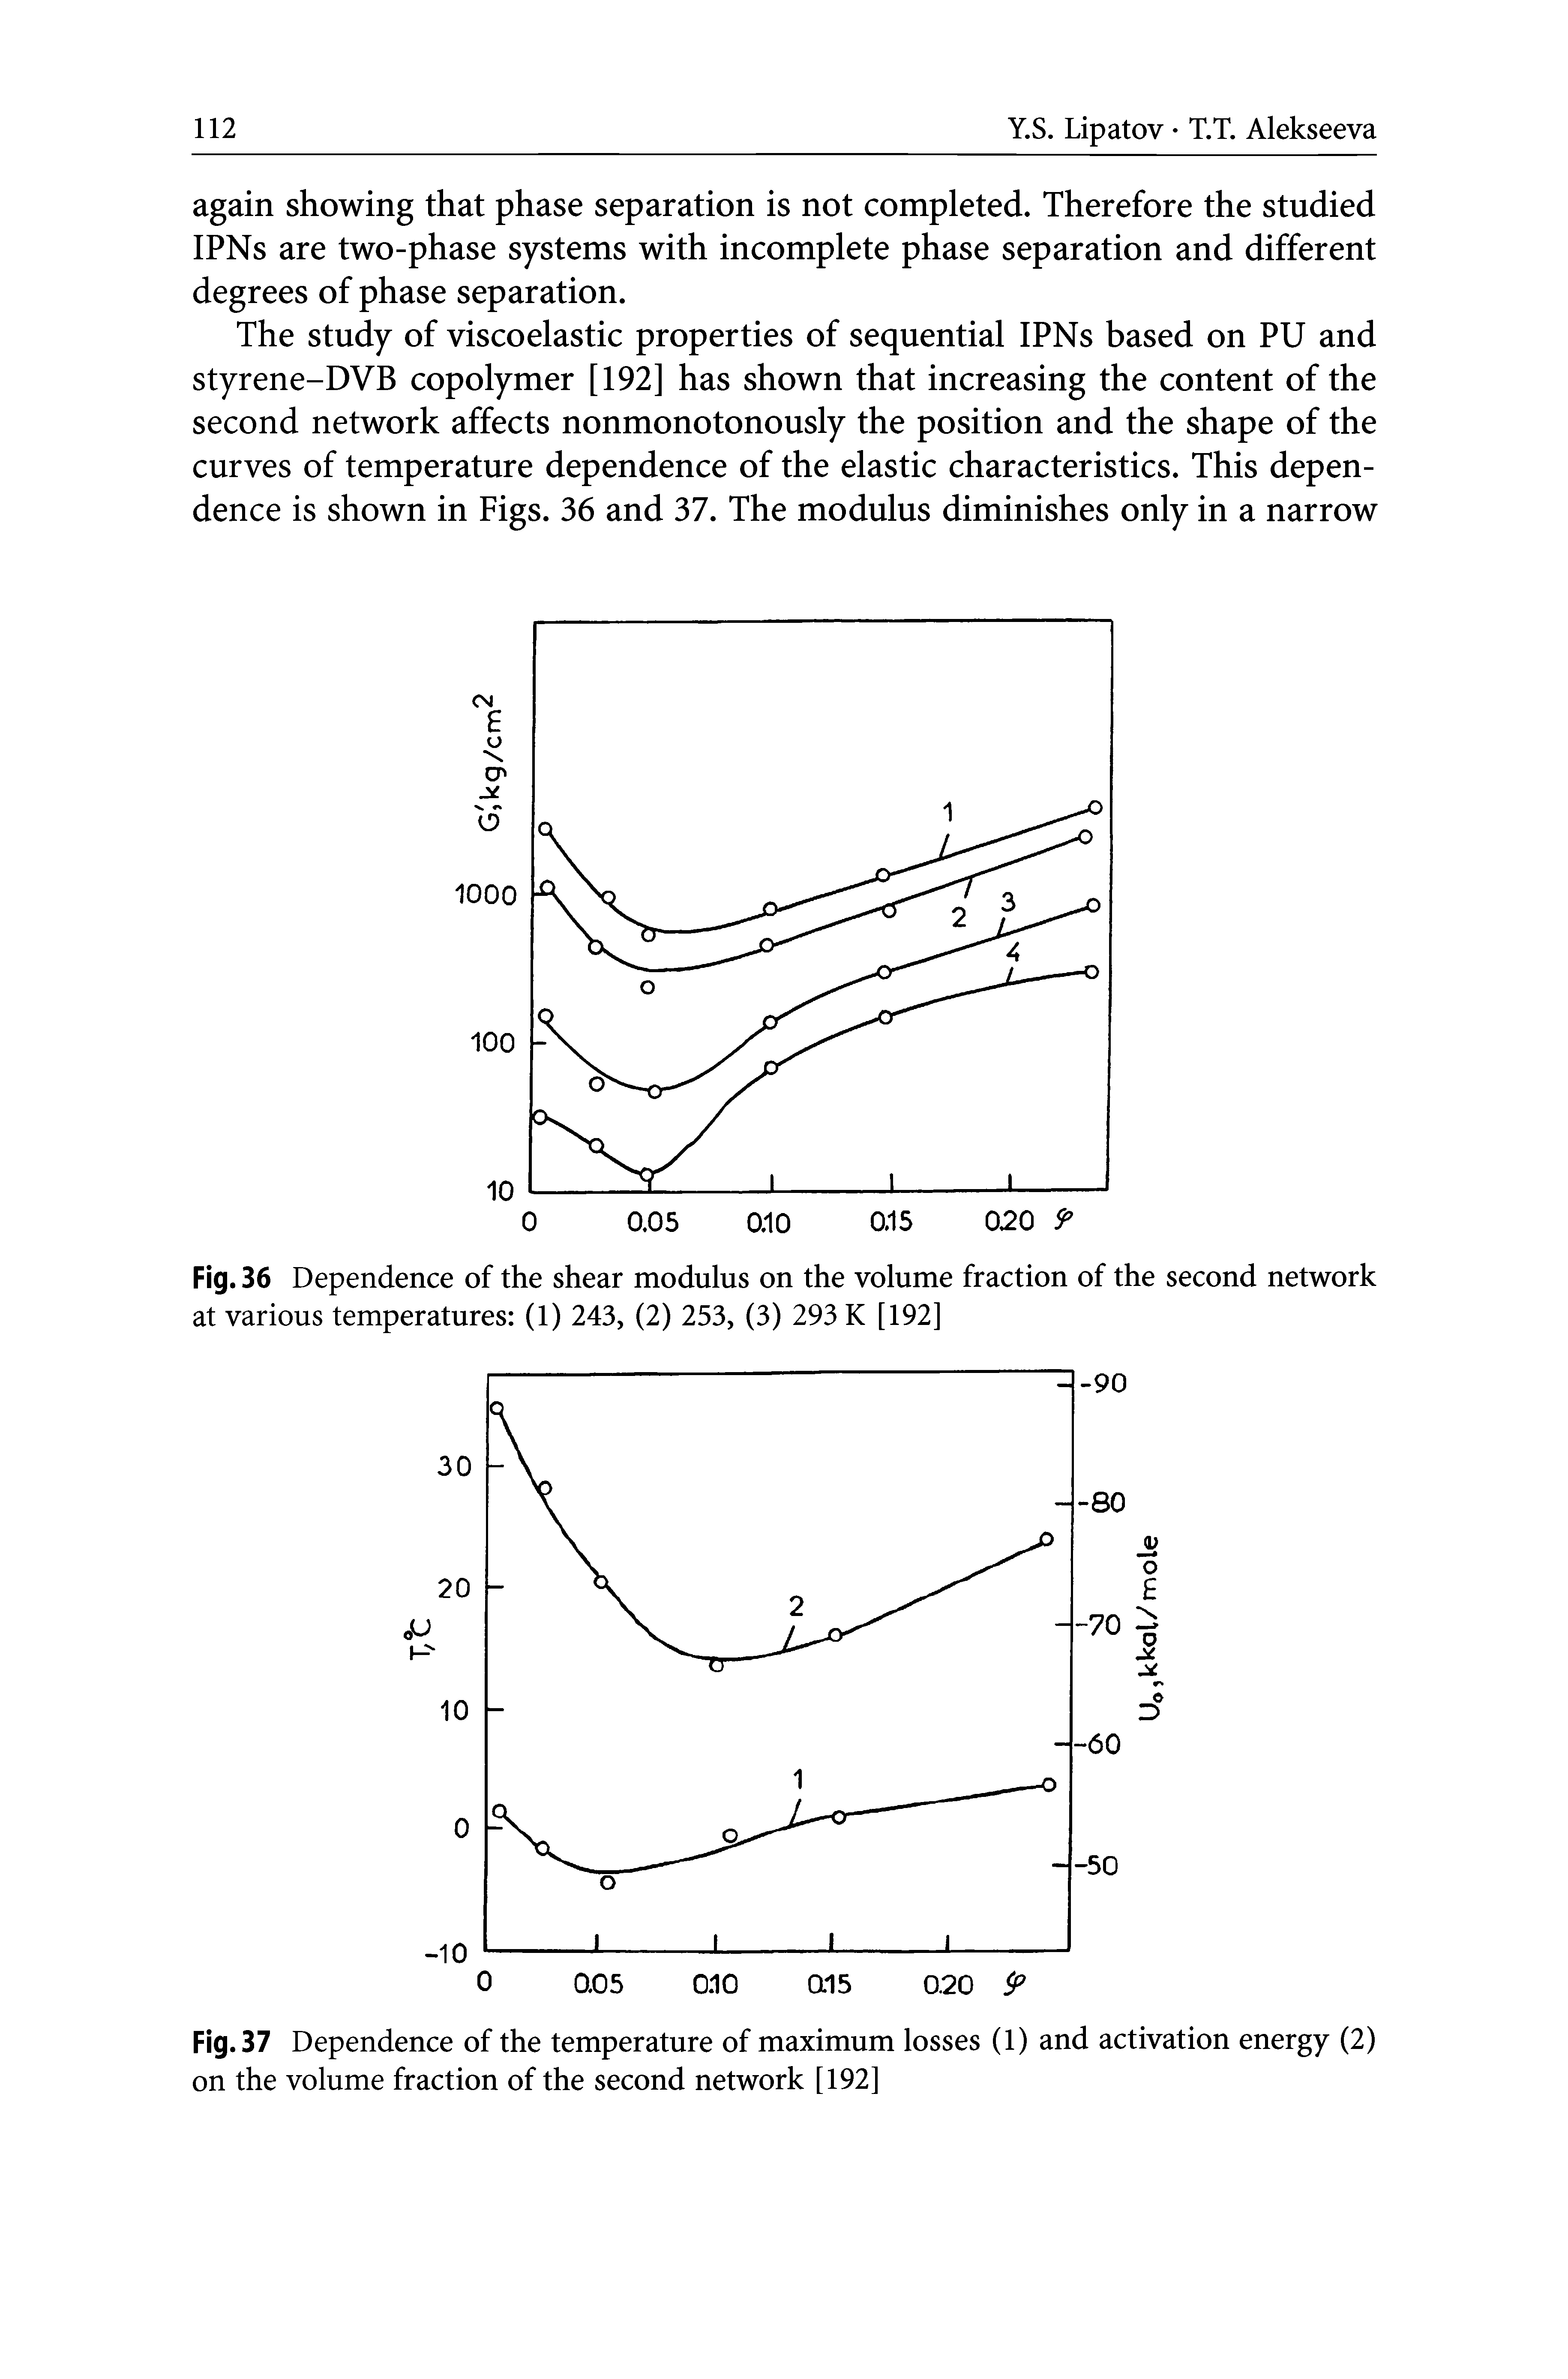 Fig. 36 Dependence of the shear modulus on the volume fraction of the second network at various temperatures (1) 243, (2) 253, (3) 293 K [192]...